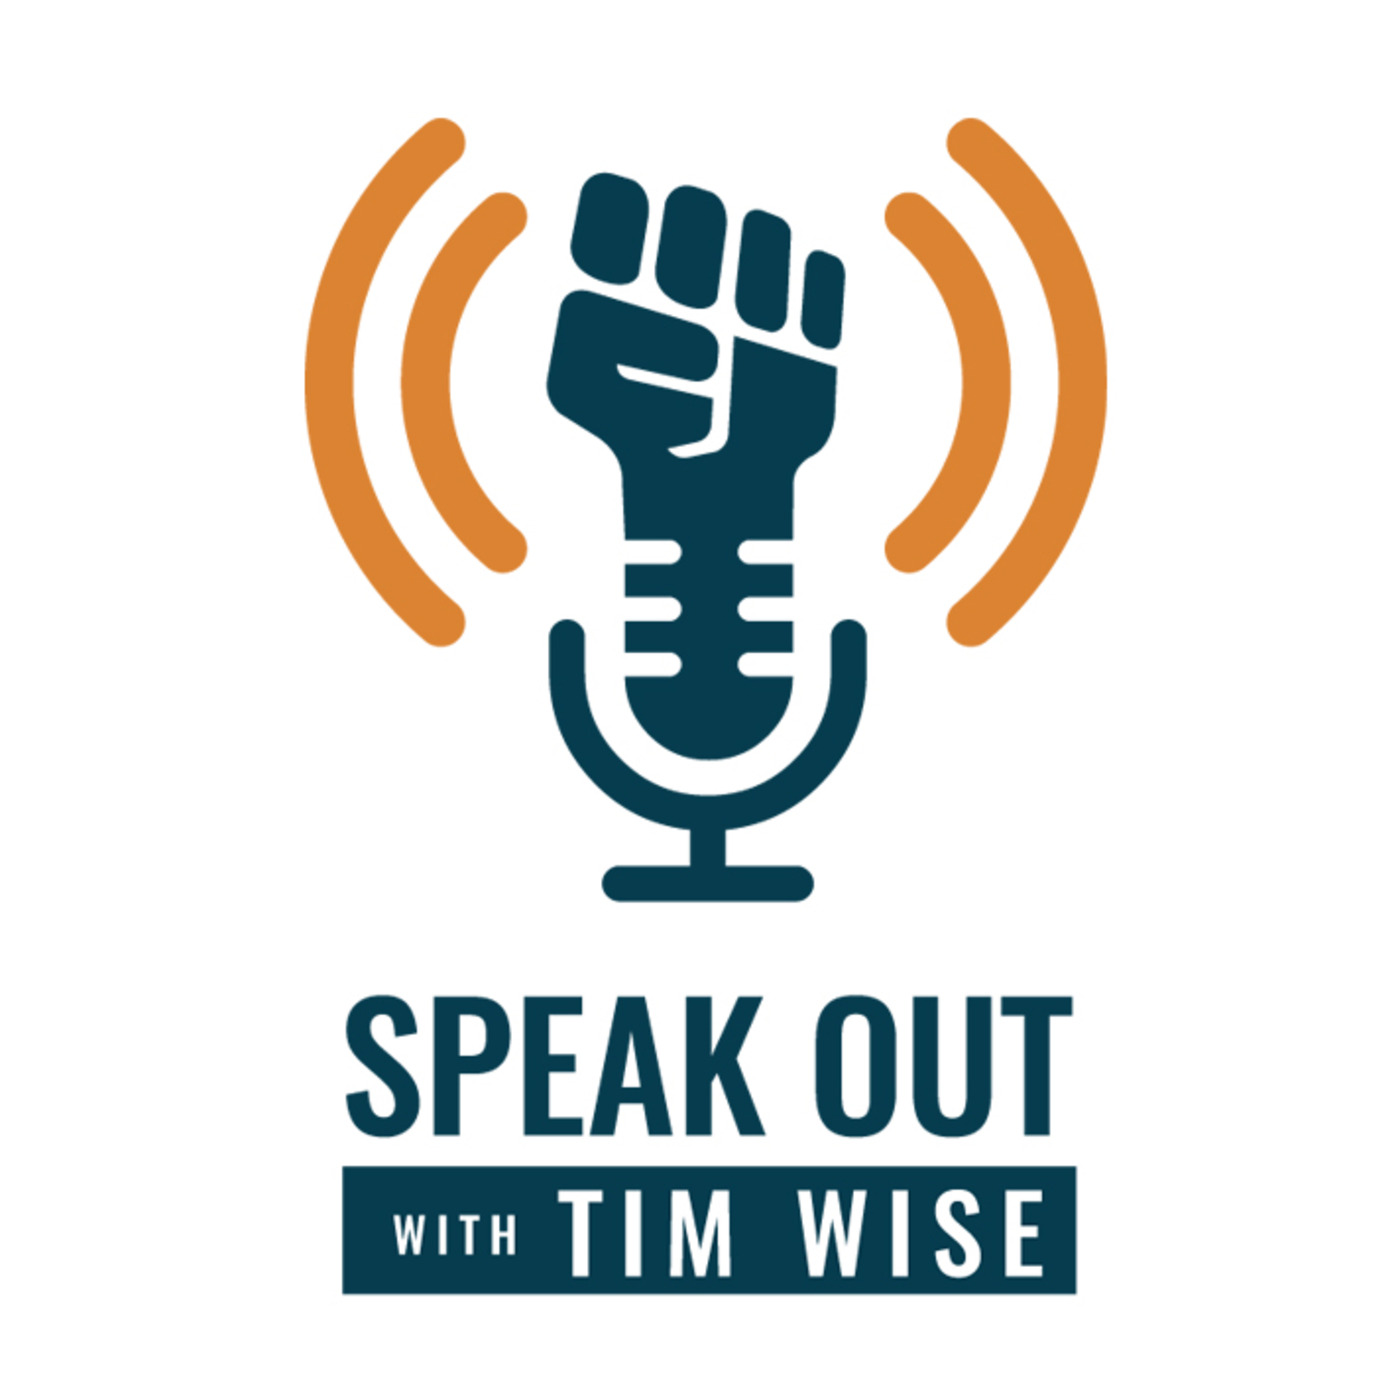 Episode 49 - Talking About Race in a Time of Turmoil: Dr. David Campt on the White Ally Toolkit for Constructive Dialogue